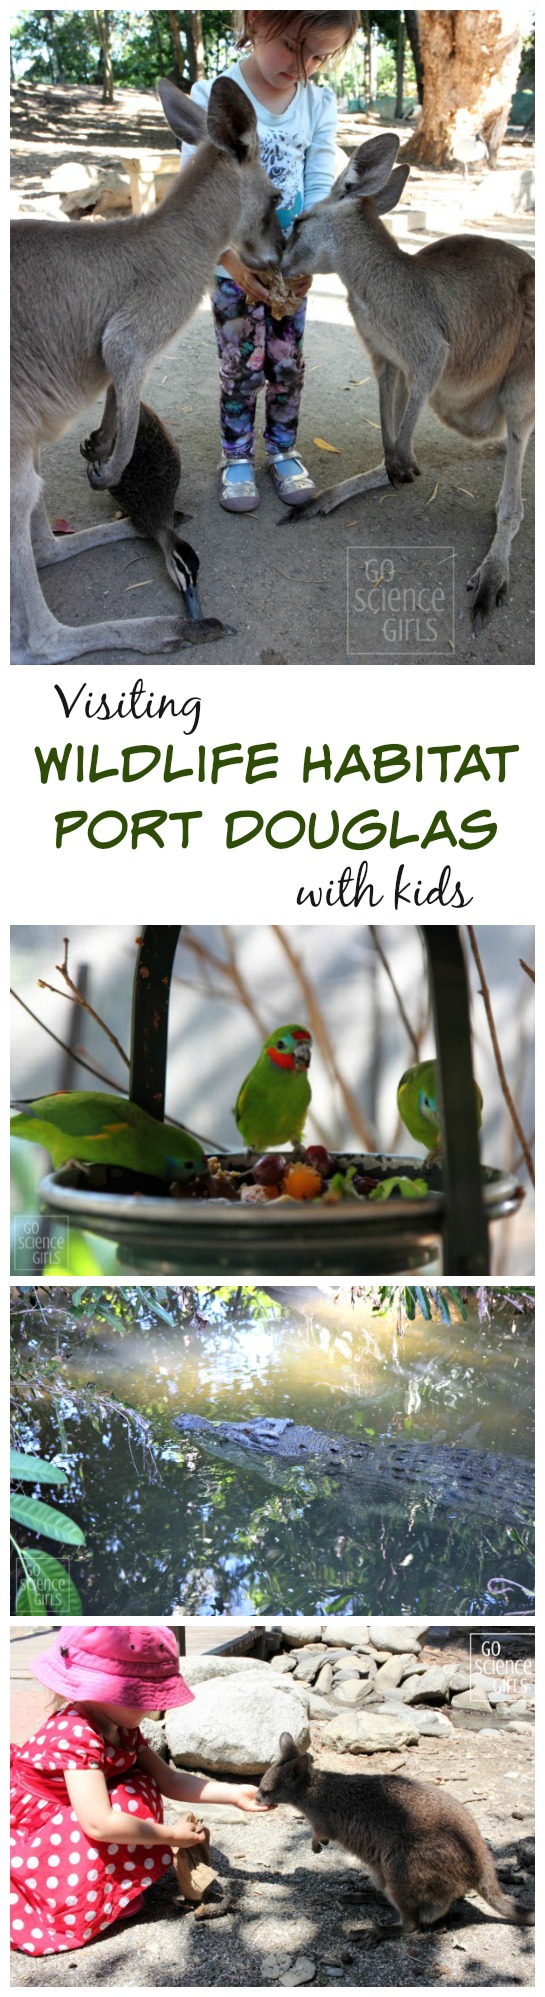 Wildlife Habitat Port Douglas - awesome way to incorporate science & nature when travelling with little kids in Australia's tropical north queensland